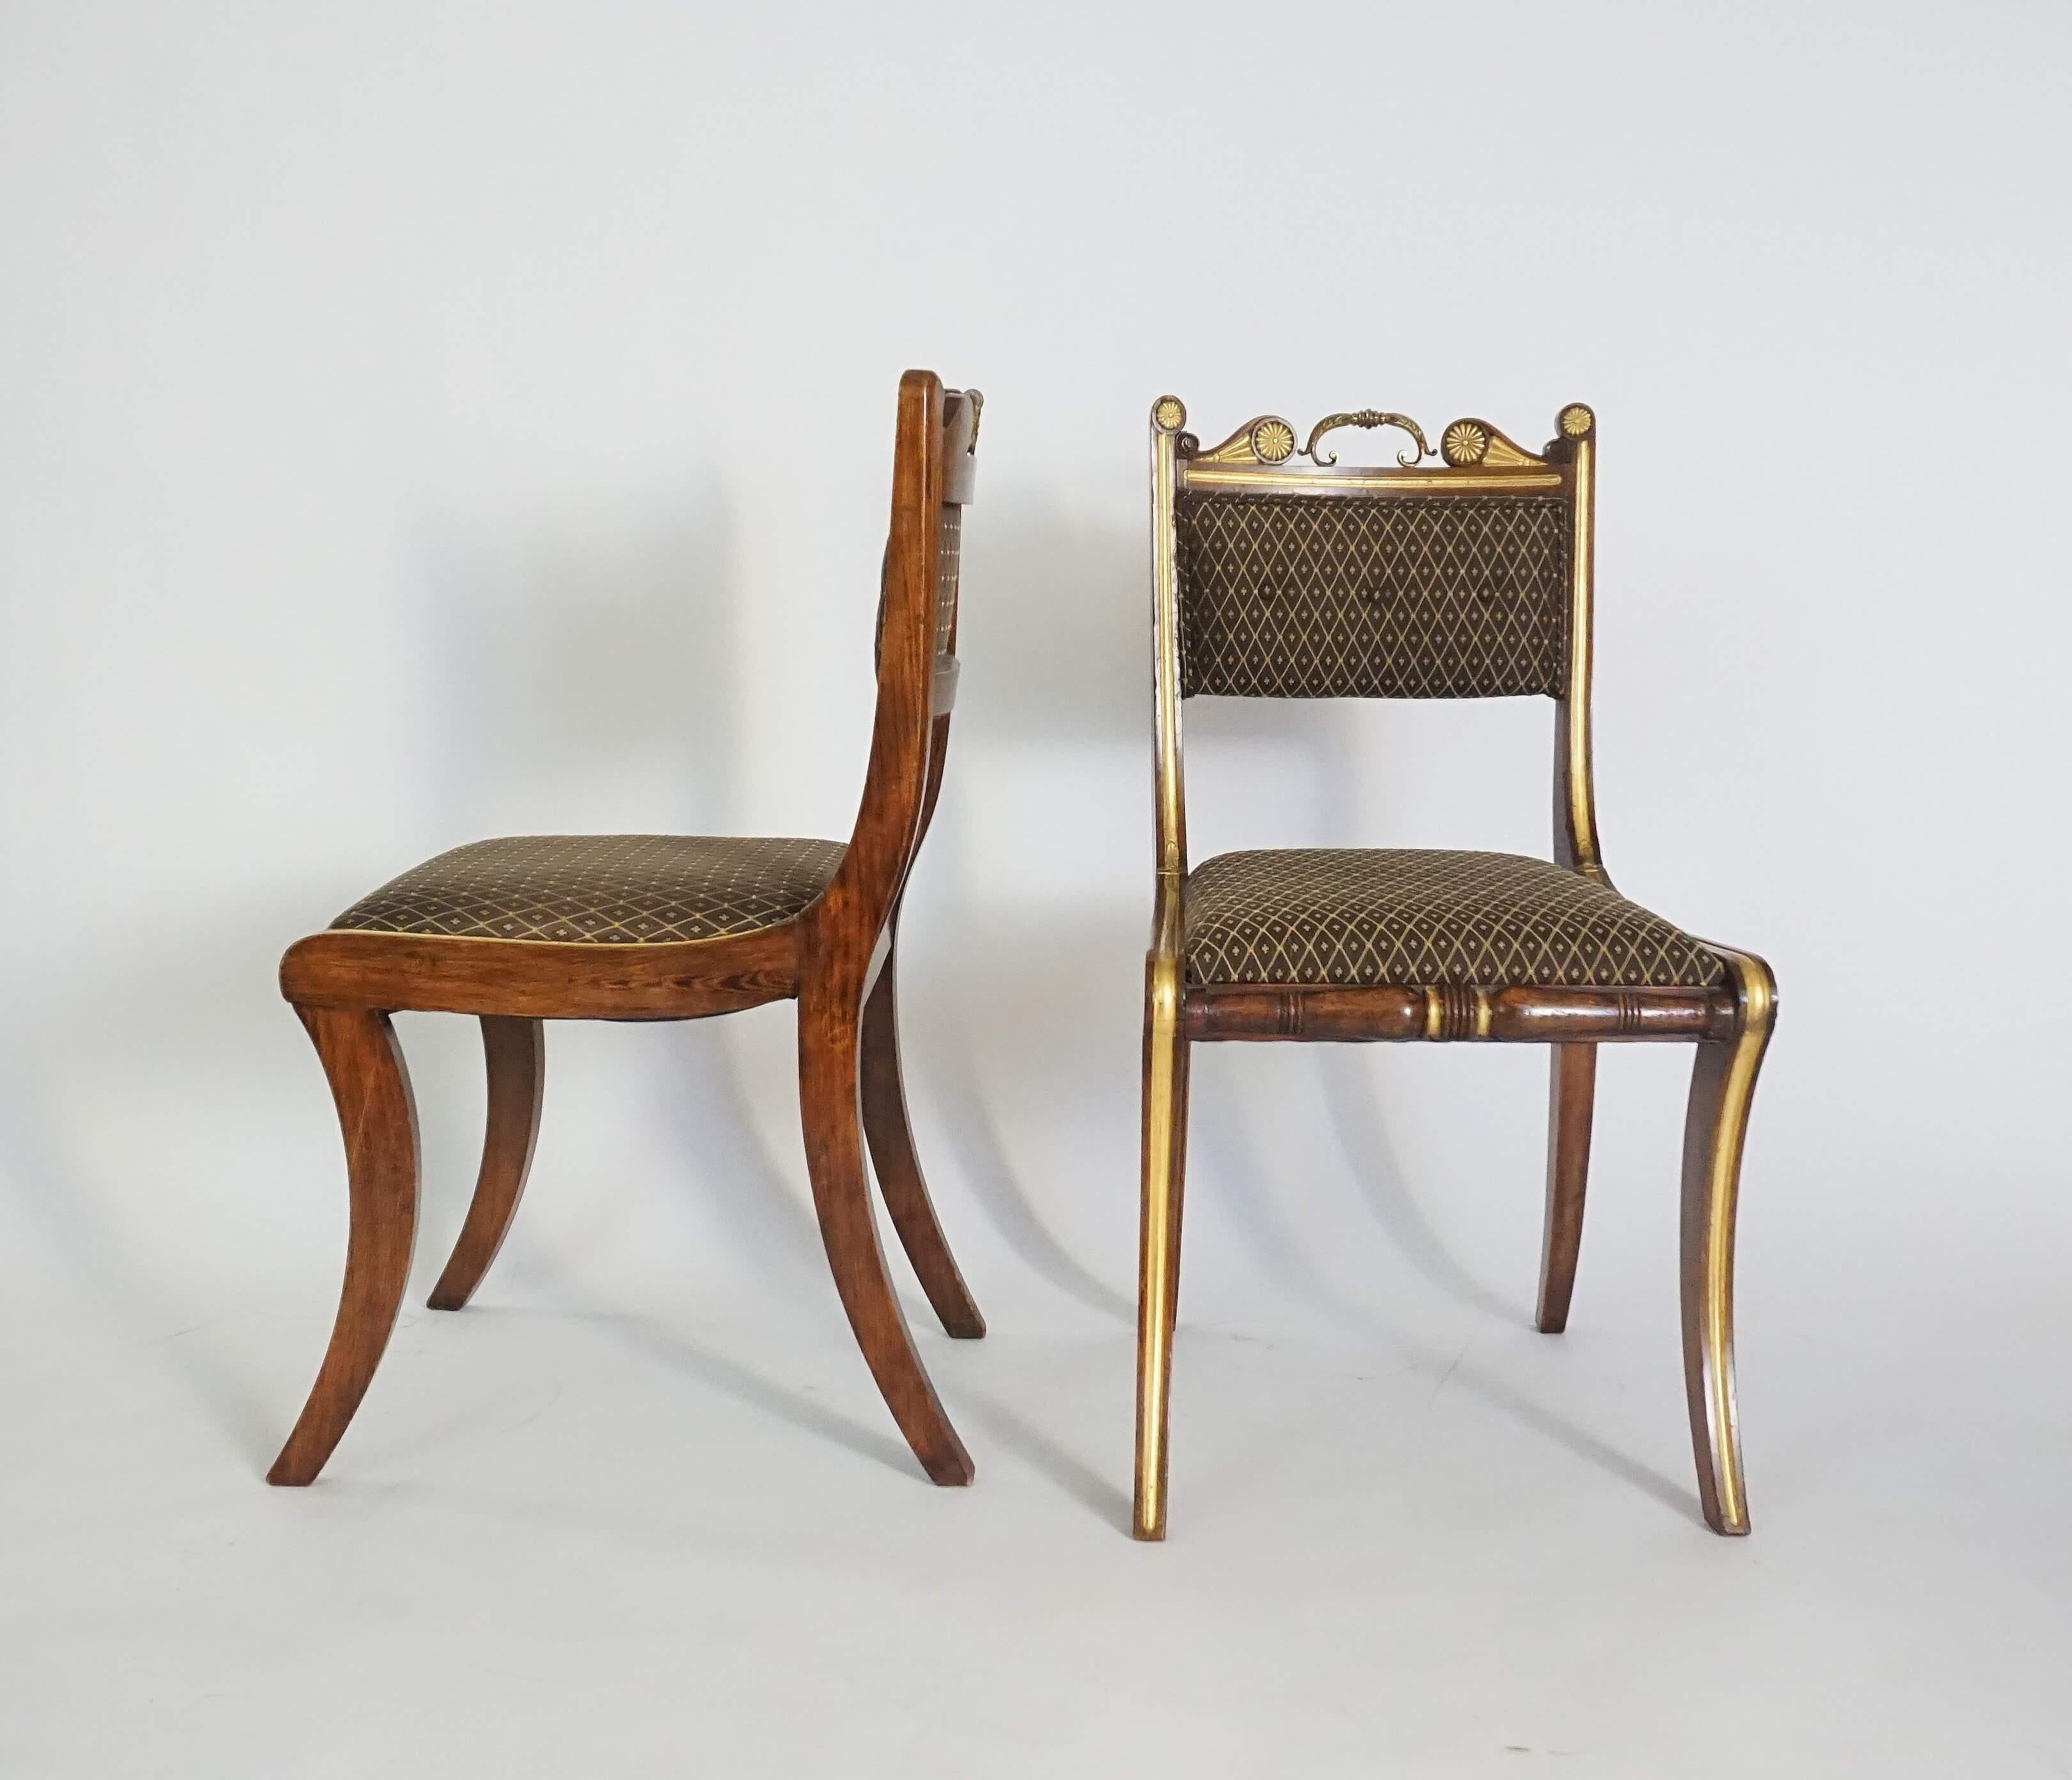 Pair of English Regency Side Chairs attributed to Morel & Hughes, circa 1815 For Sale 4